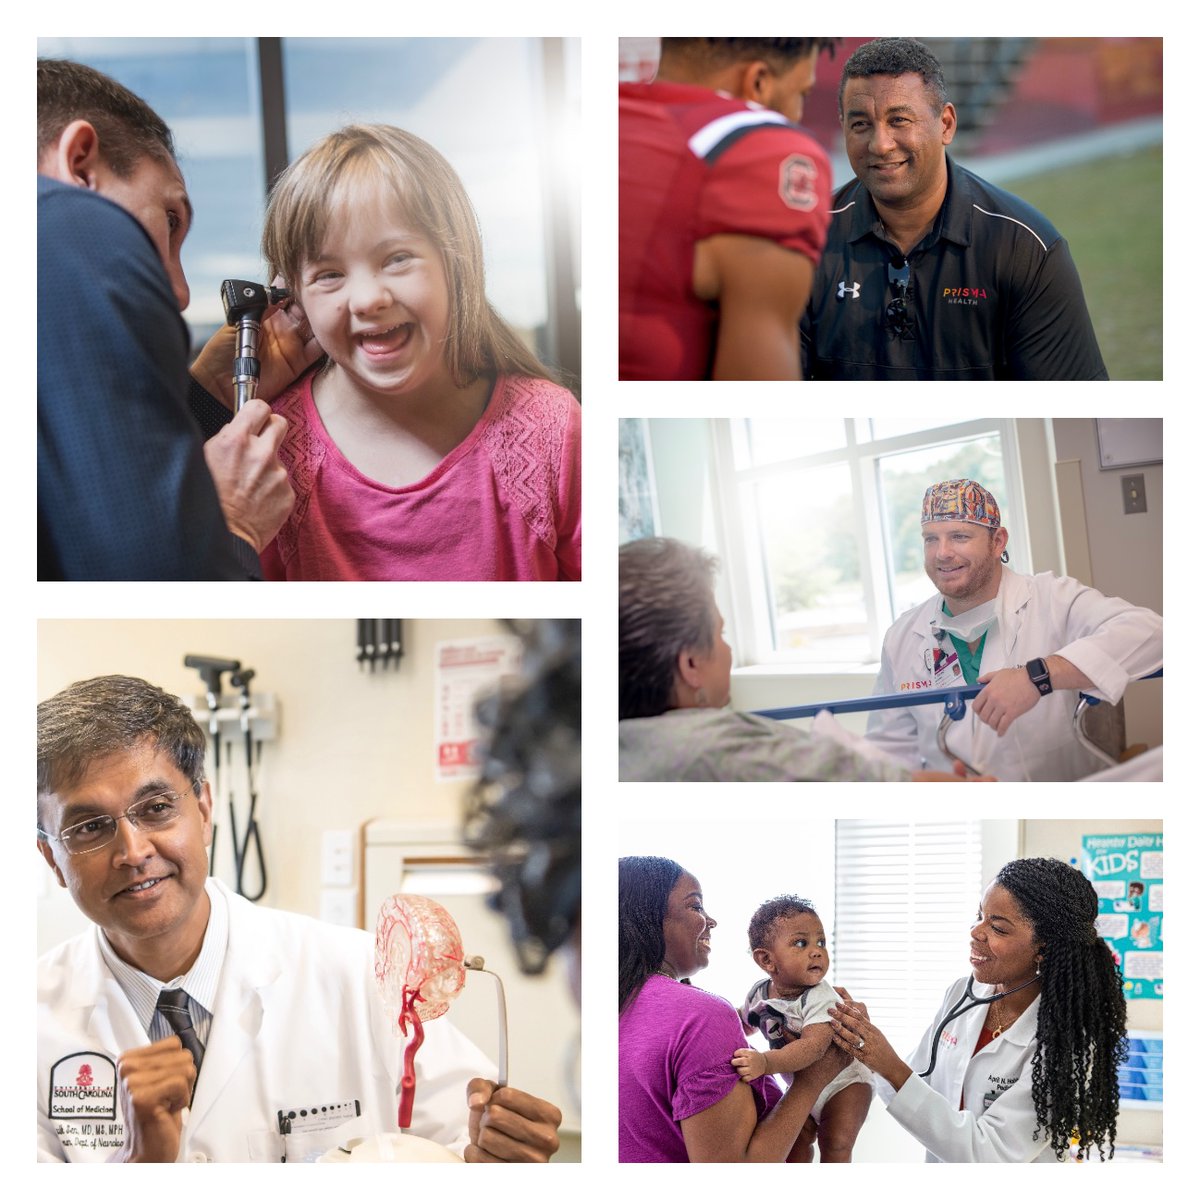 As we celebrate #DoctorsDay, we want to recognize the many talented & compassionate doctors who care for our patients. Every day, our doctors dedicate themselves to the care of others, often sacrificing their own comfort & time to ensure the health & happiness of our patients.